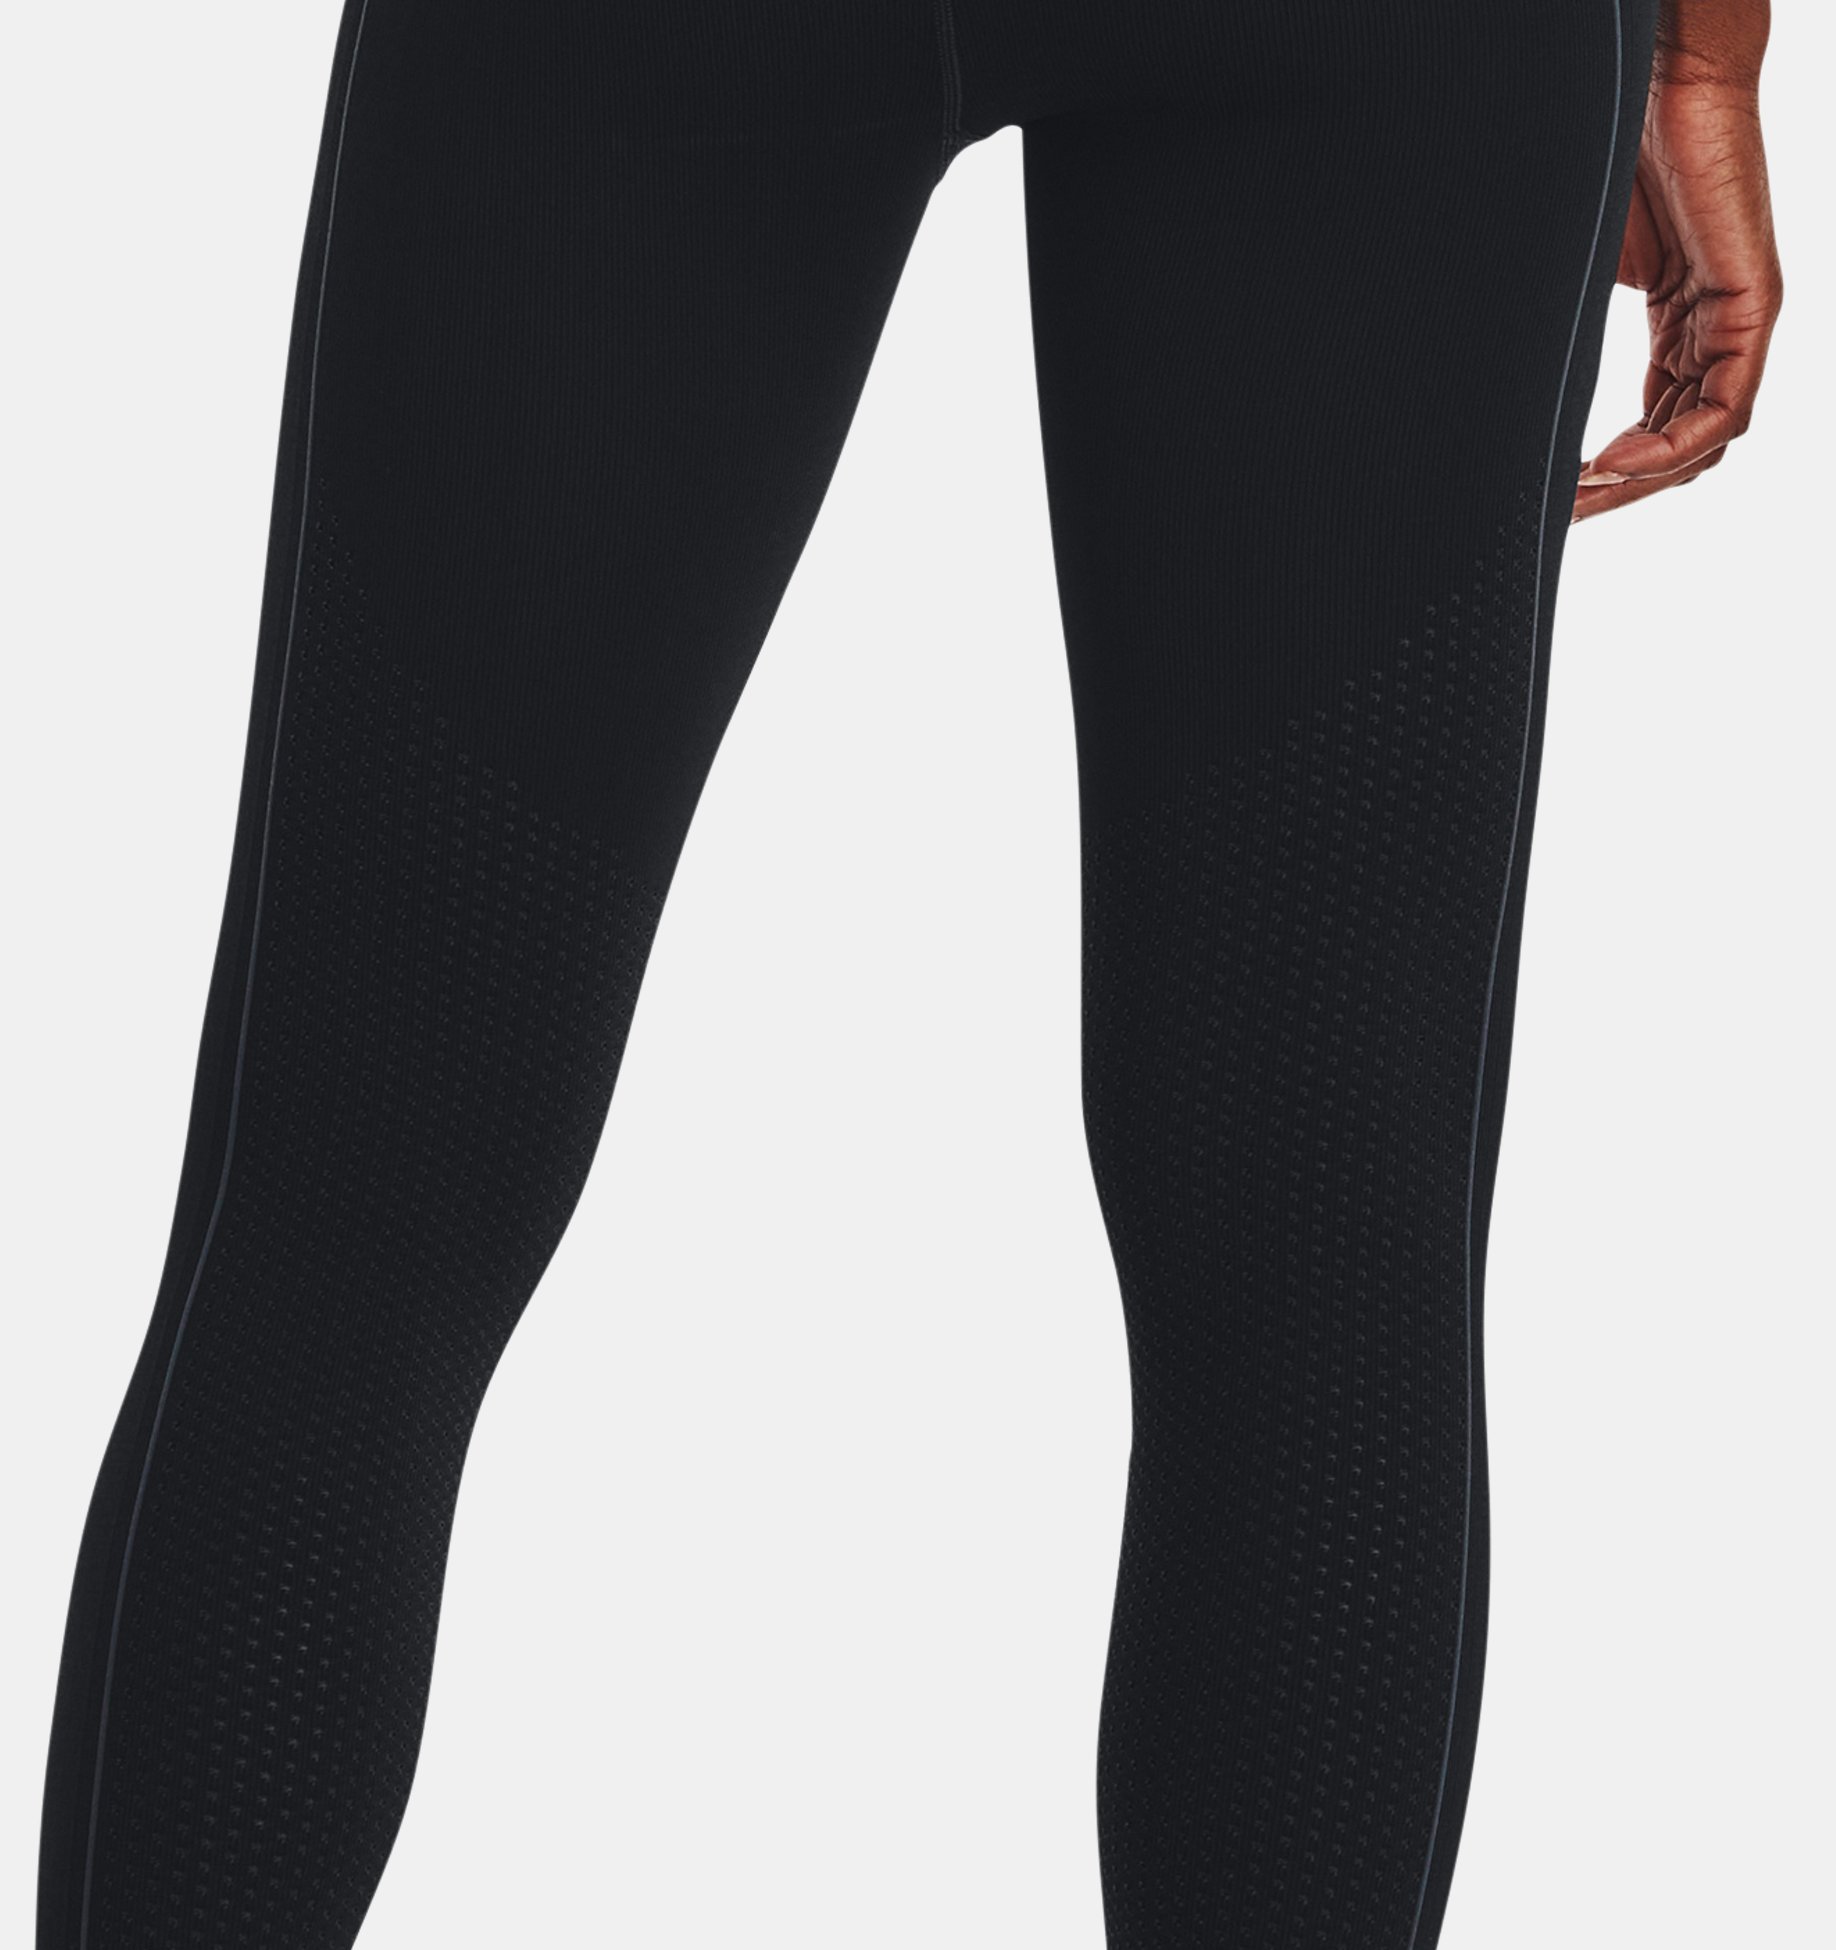 NIKE Performance Sculpt Training Tights Women's (Black, LG x One Size) :  : Clothing, Shoes & Accessories